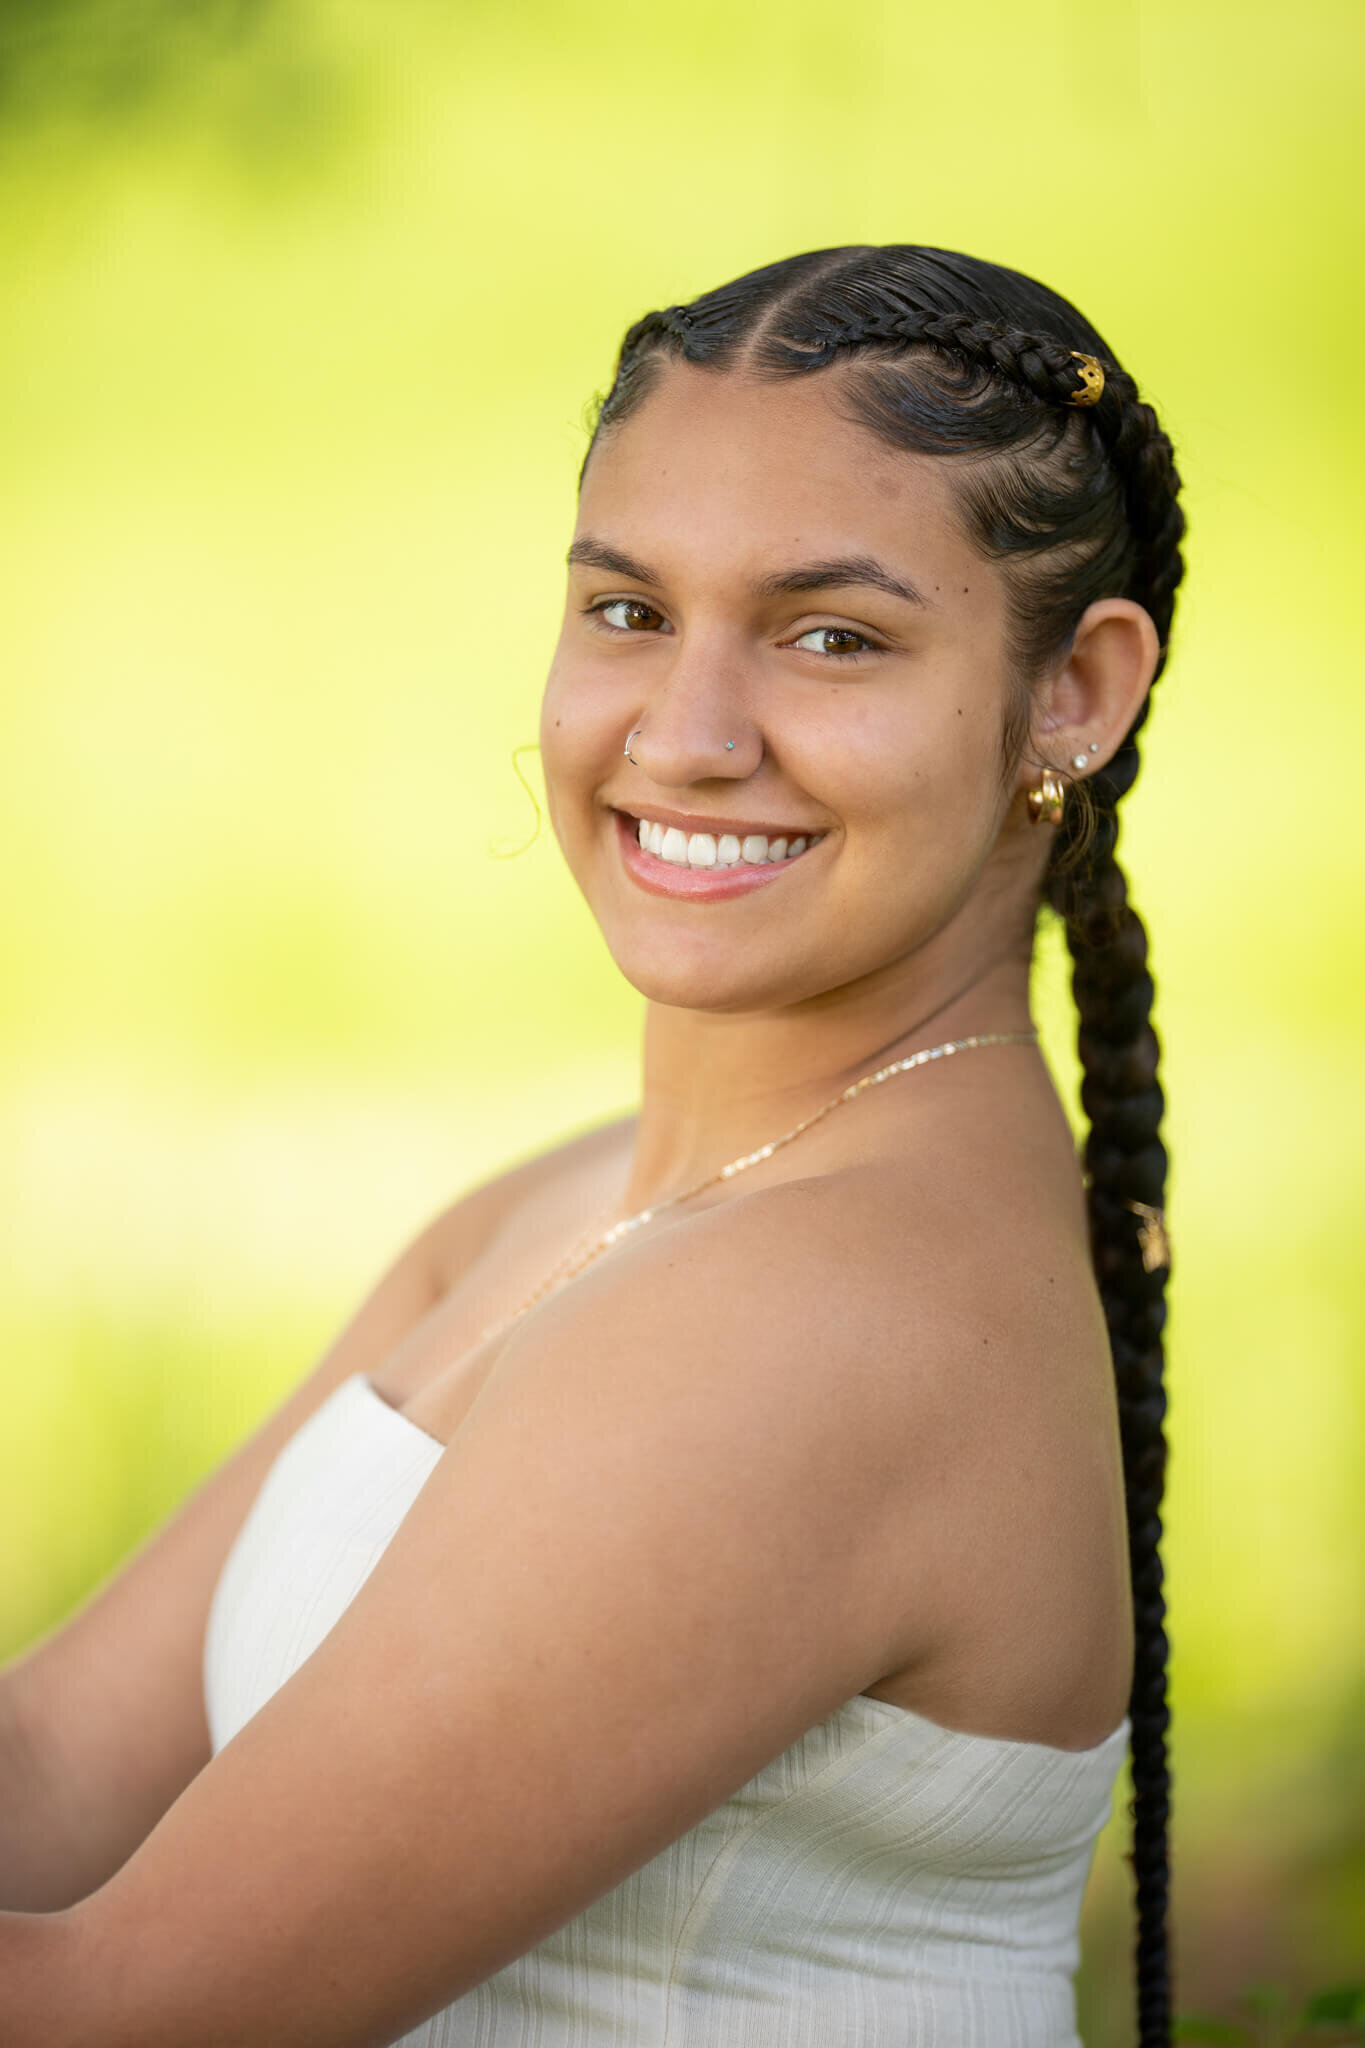 High school senior portrait photography in Clinton MA  of female in a white top smiling at the camera with a green and yellow background